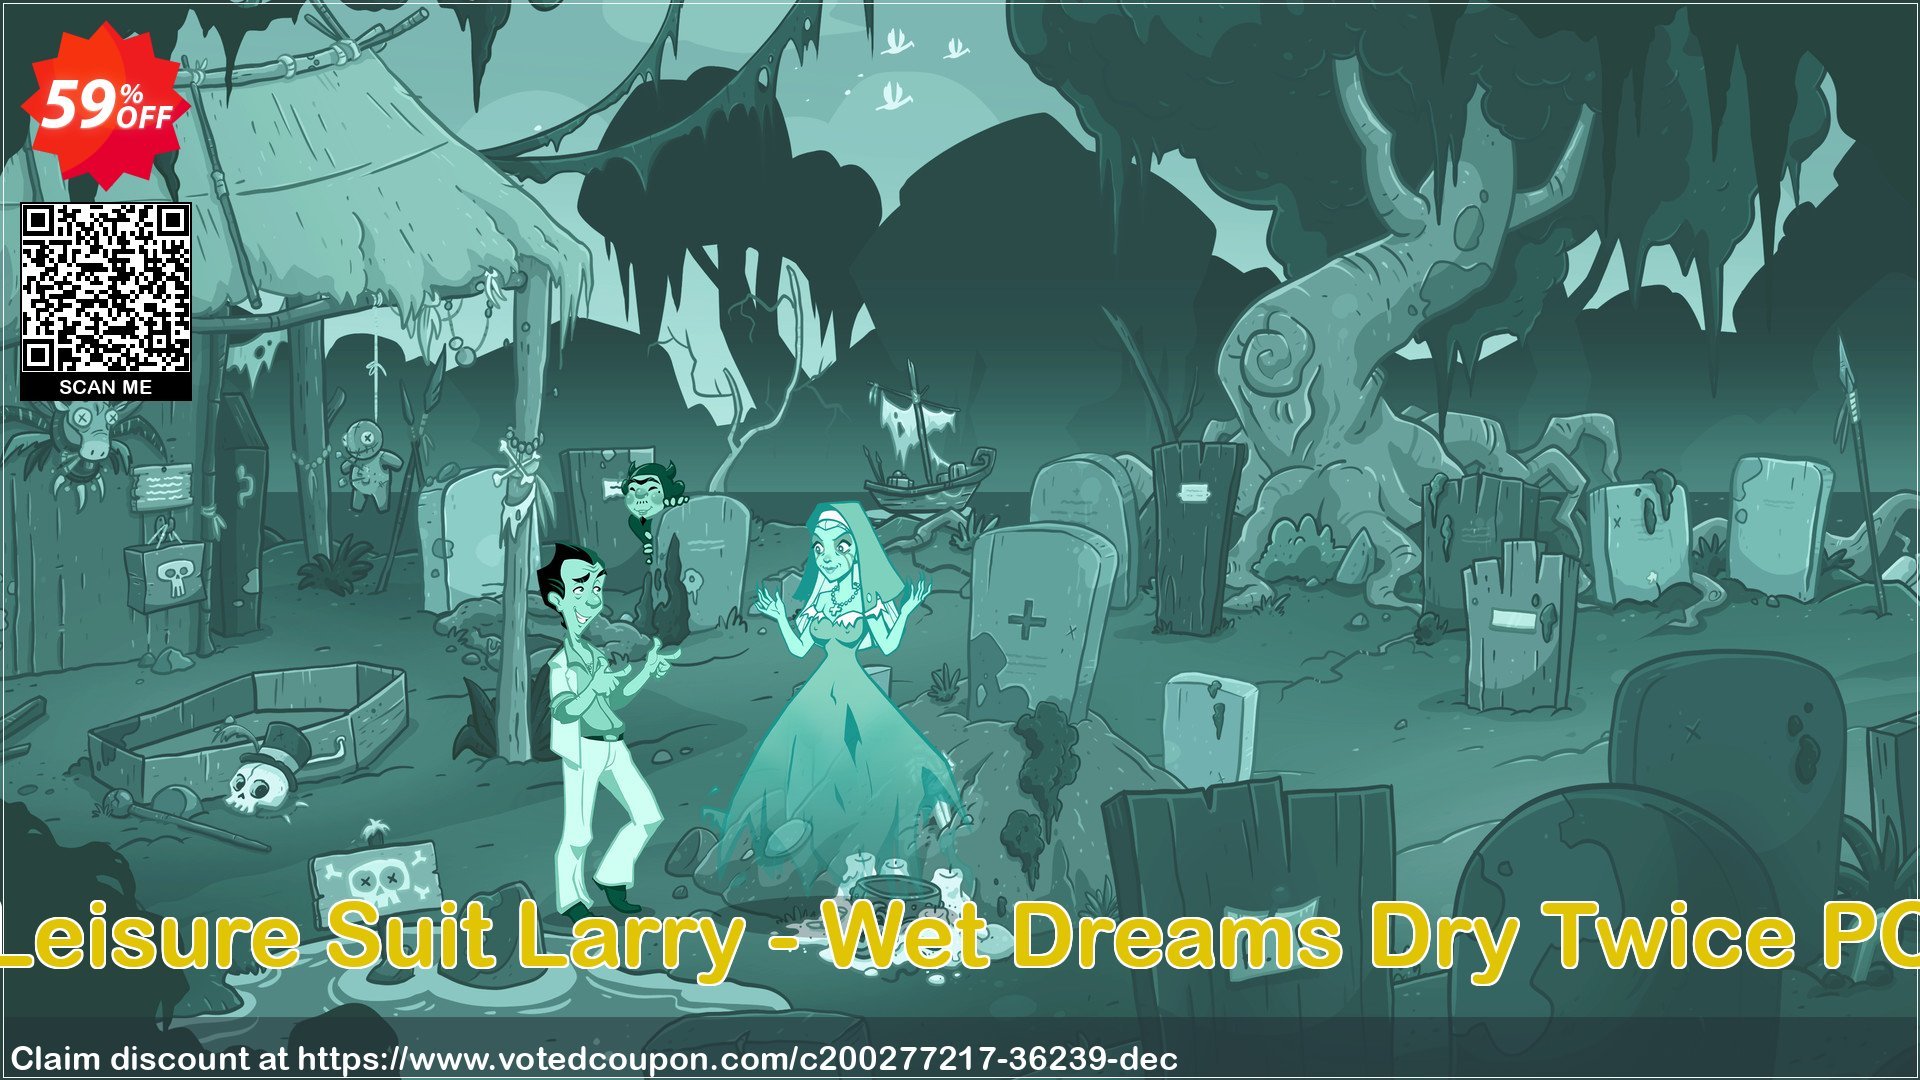 Leisure Suit Larry - Wet Dreams Dry Twice PC Coupon Code May 2024, 59% OFF - VotedCoupon